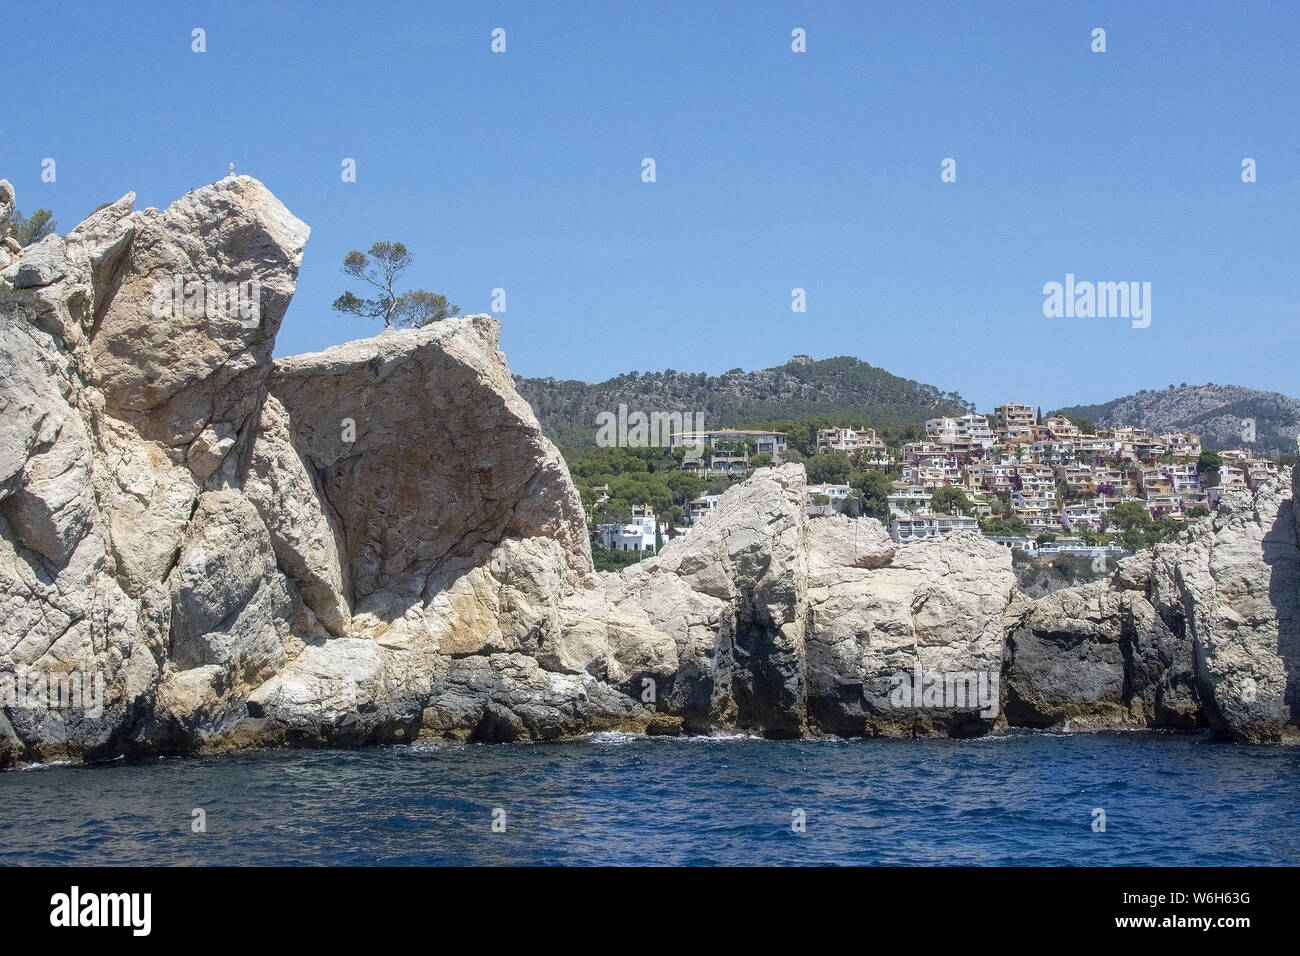 Coastal rocks and village in the distance in southwest Mallorca, Spain. Stock Photo